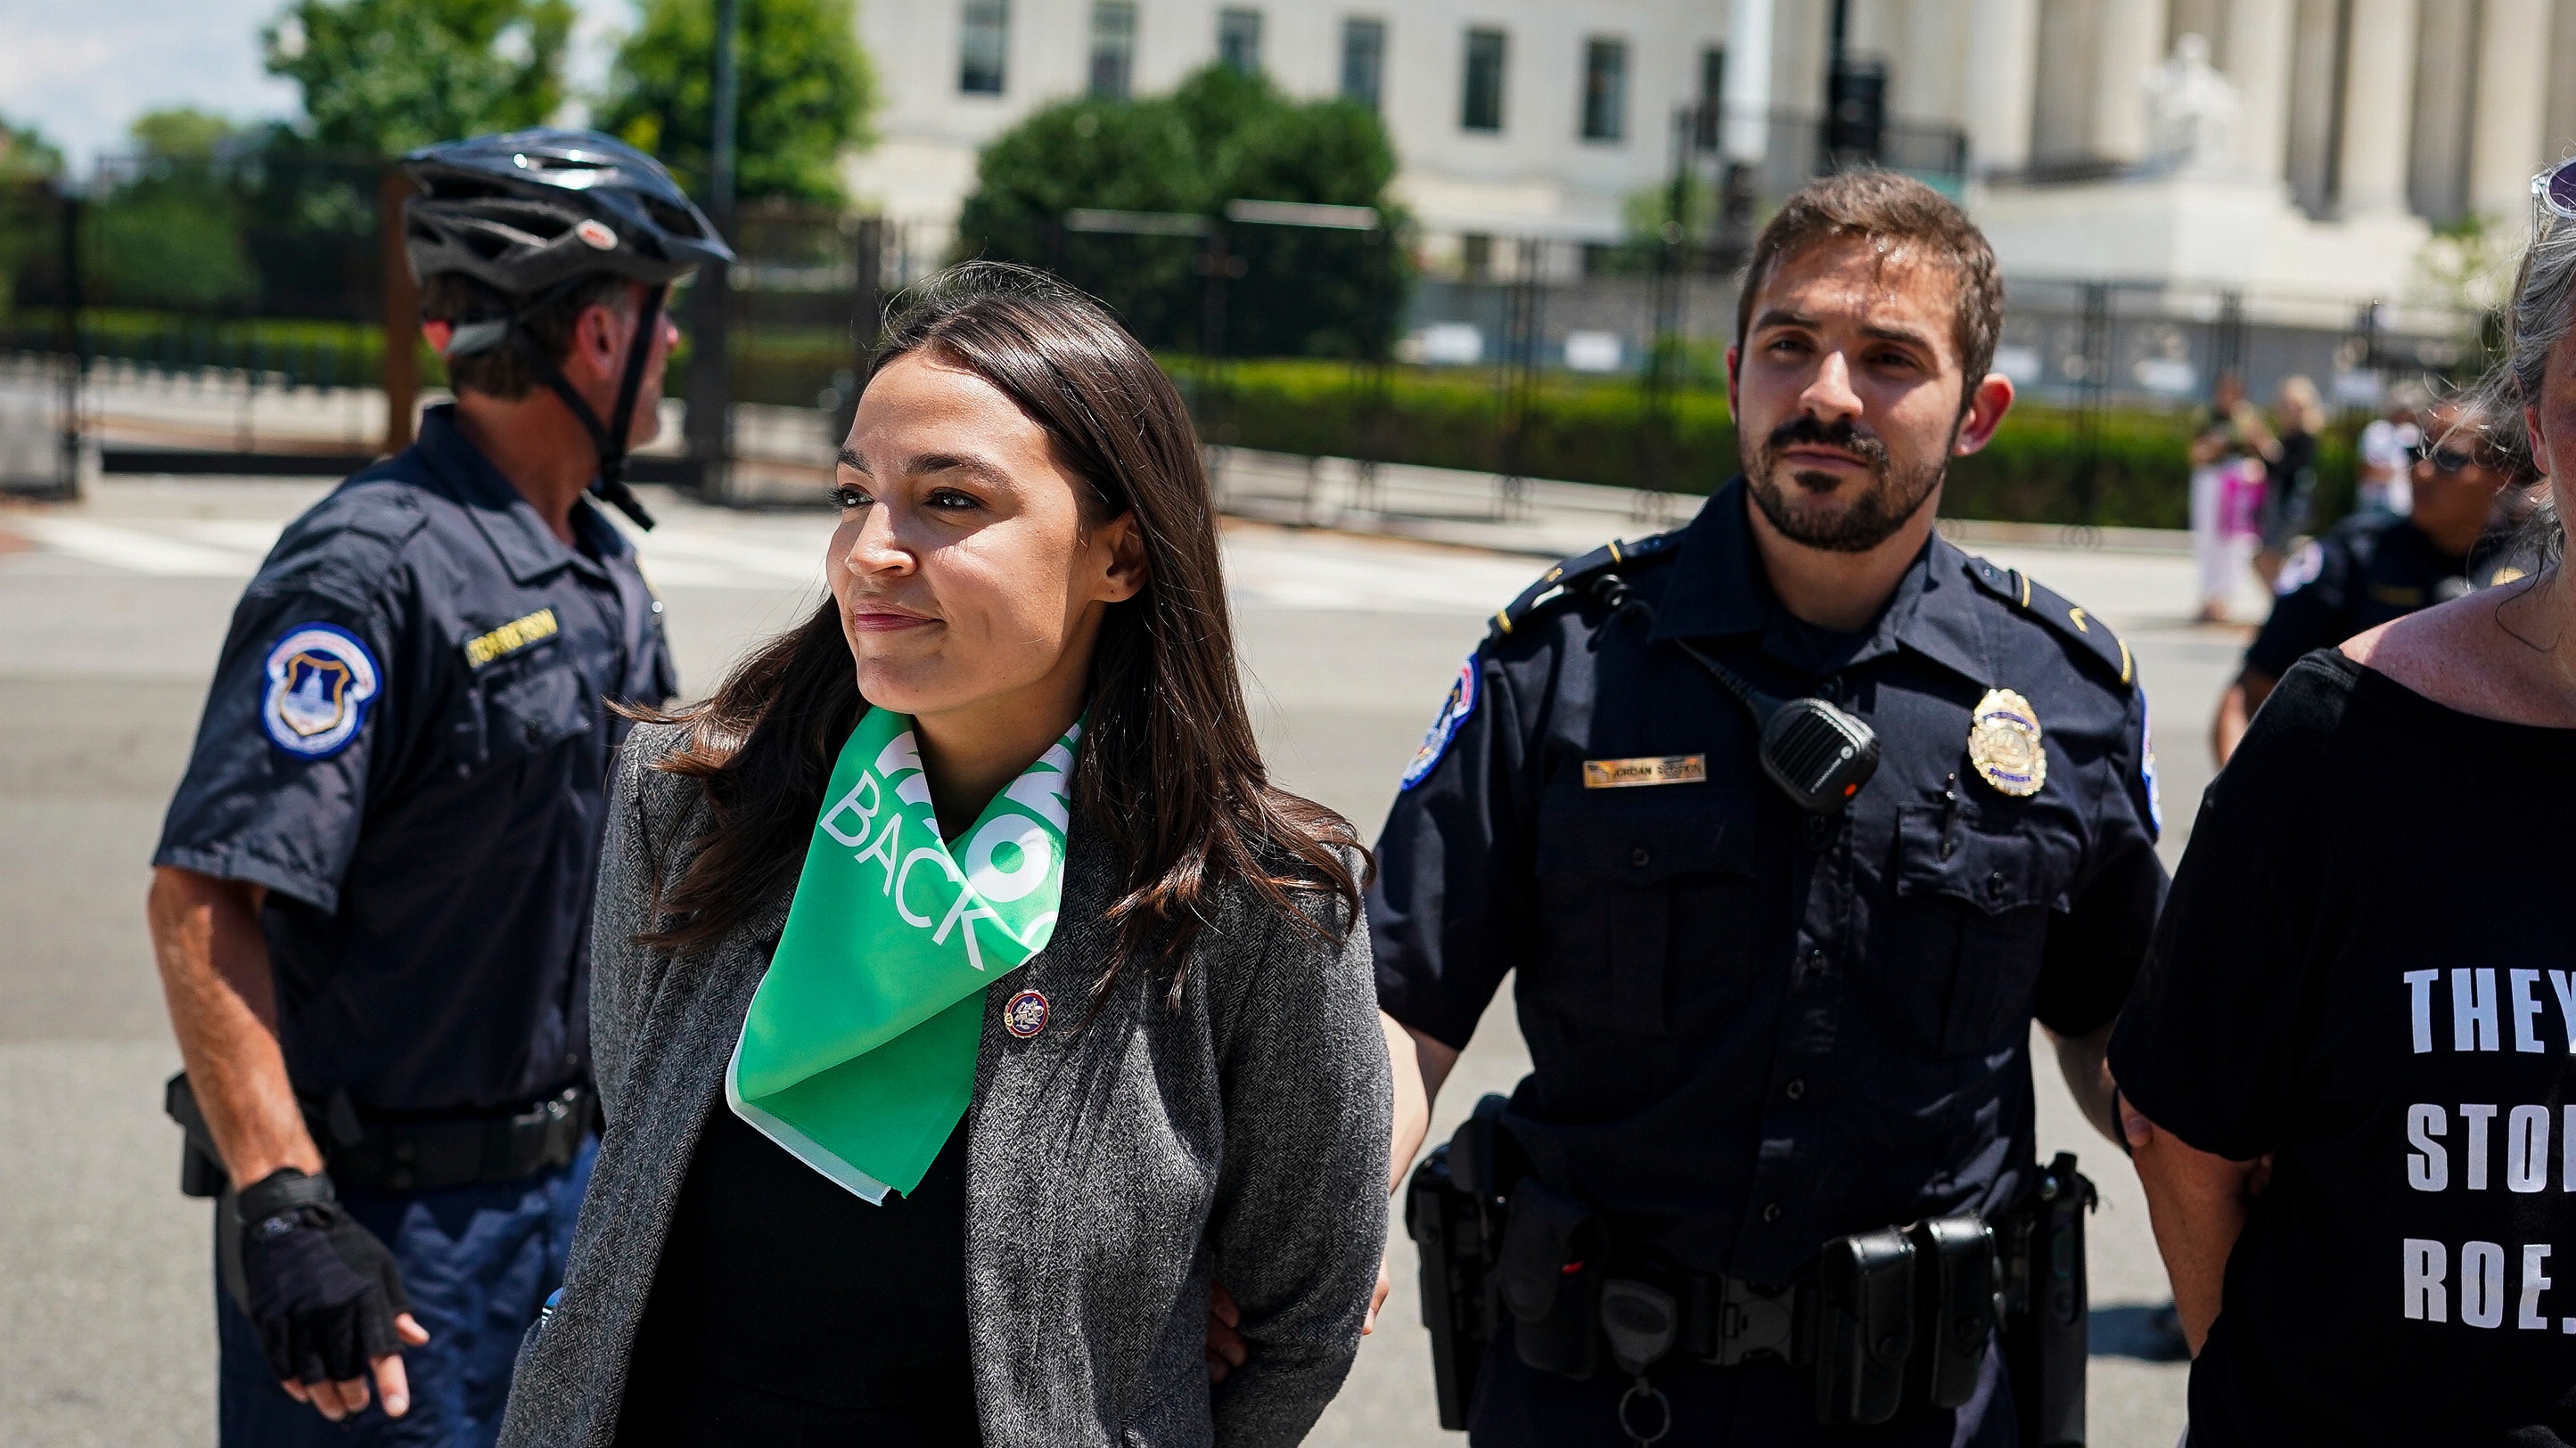 Congresswoman Ocasio-Cortez is arrested outside the US Supreme Court during an abortion rights protest